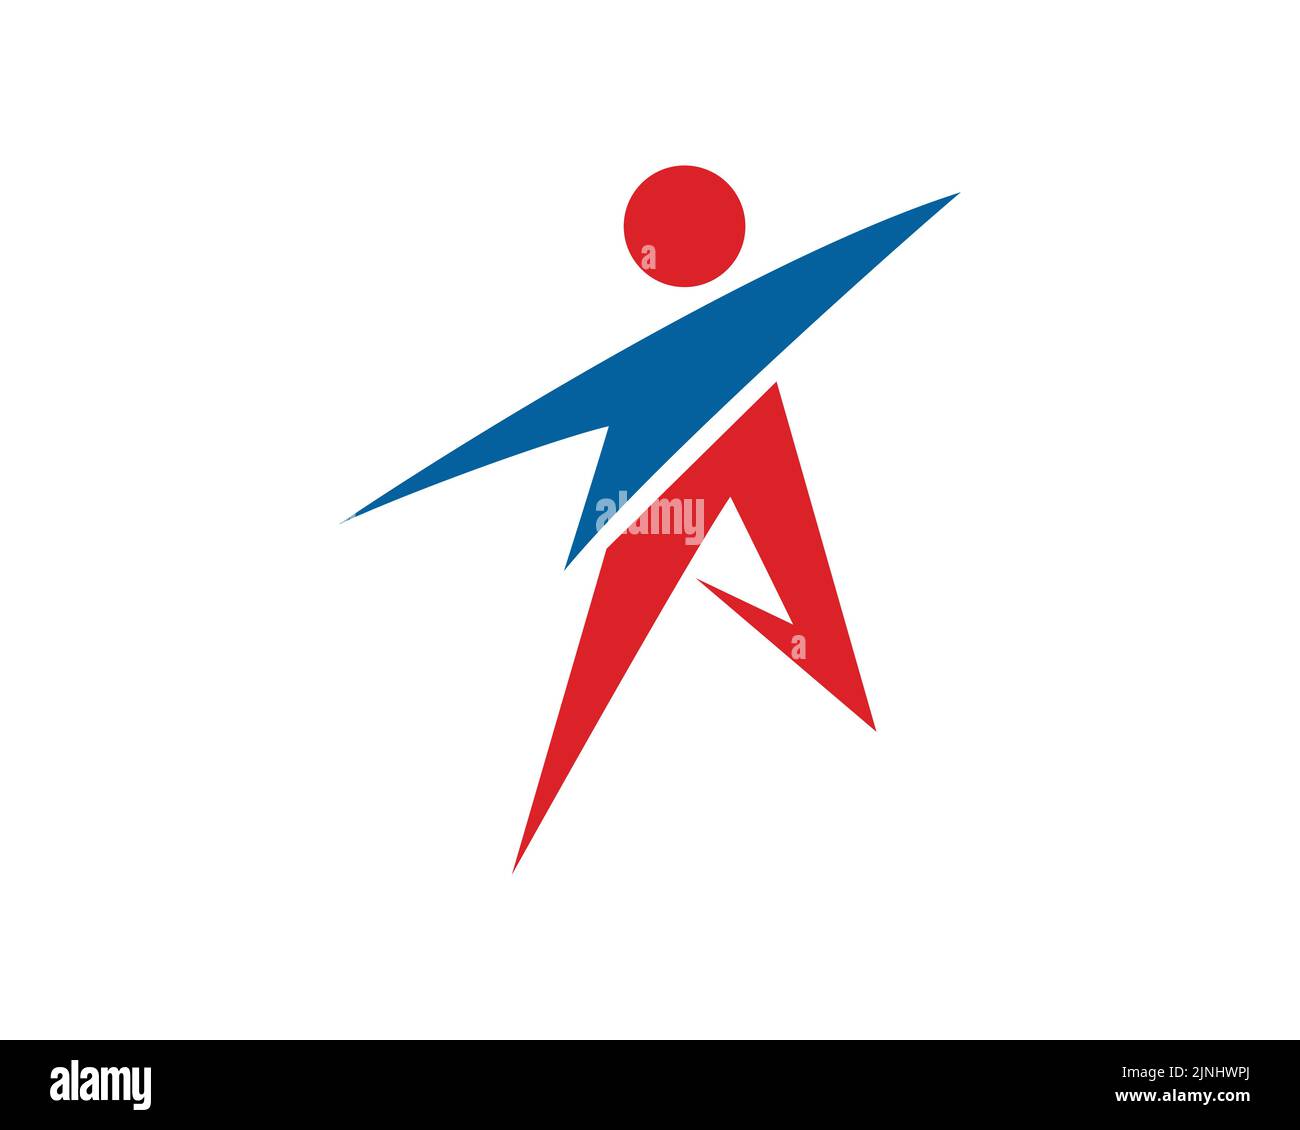 Simple Figure with Reaching and Achieving Gesture Symbolizing Passion, Ambition and Spirit Mood Stock Vector